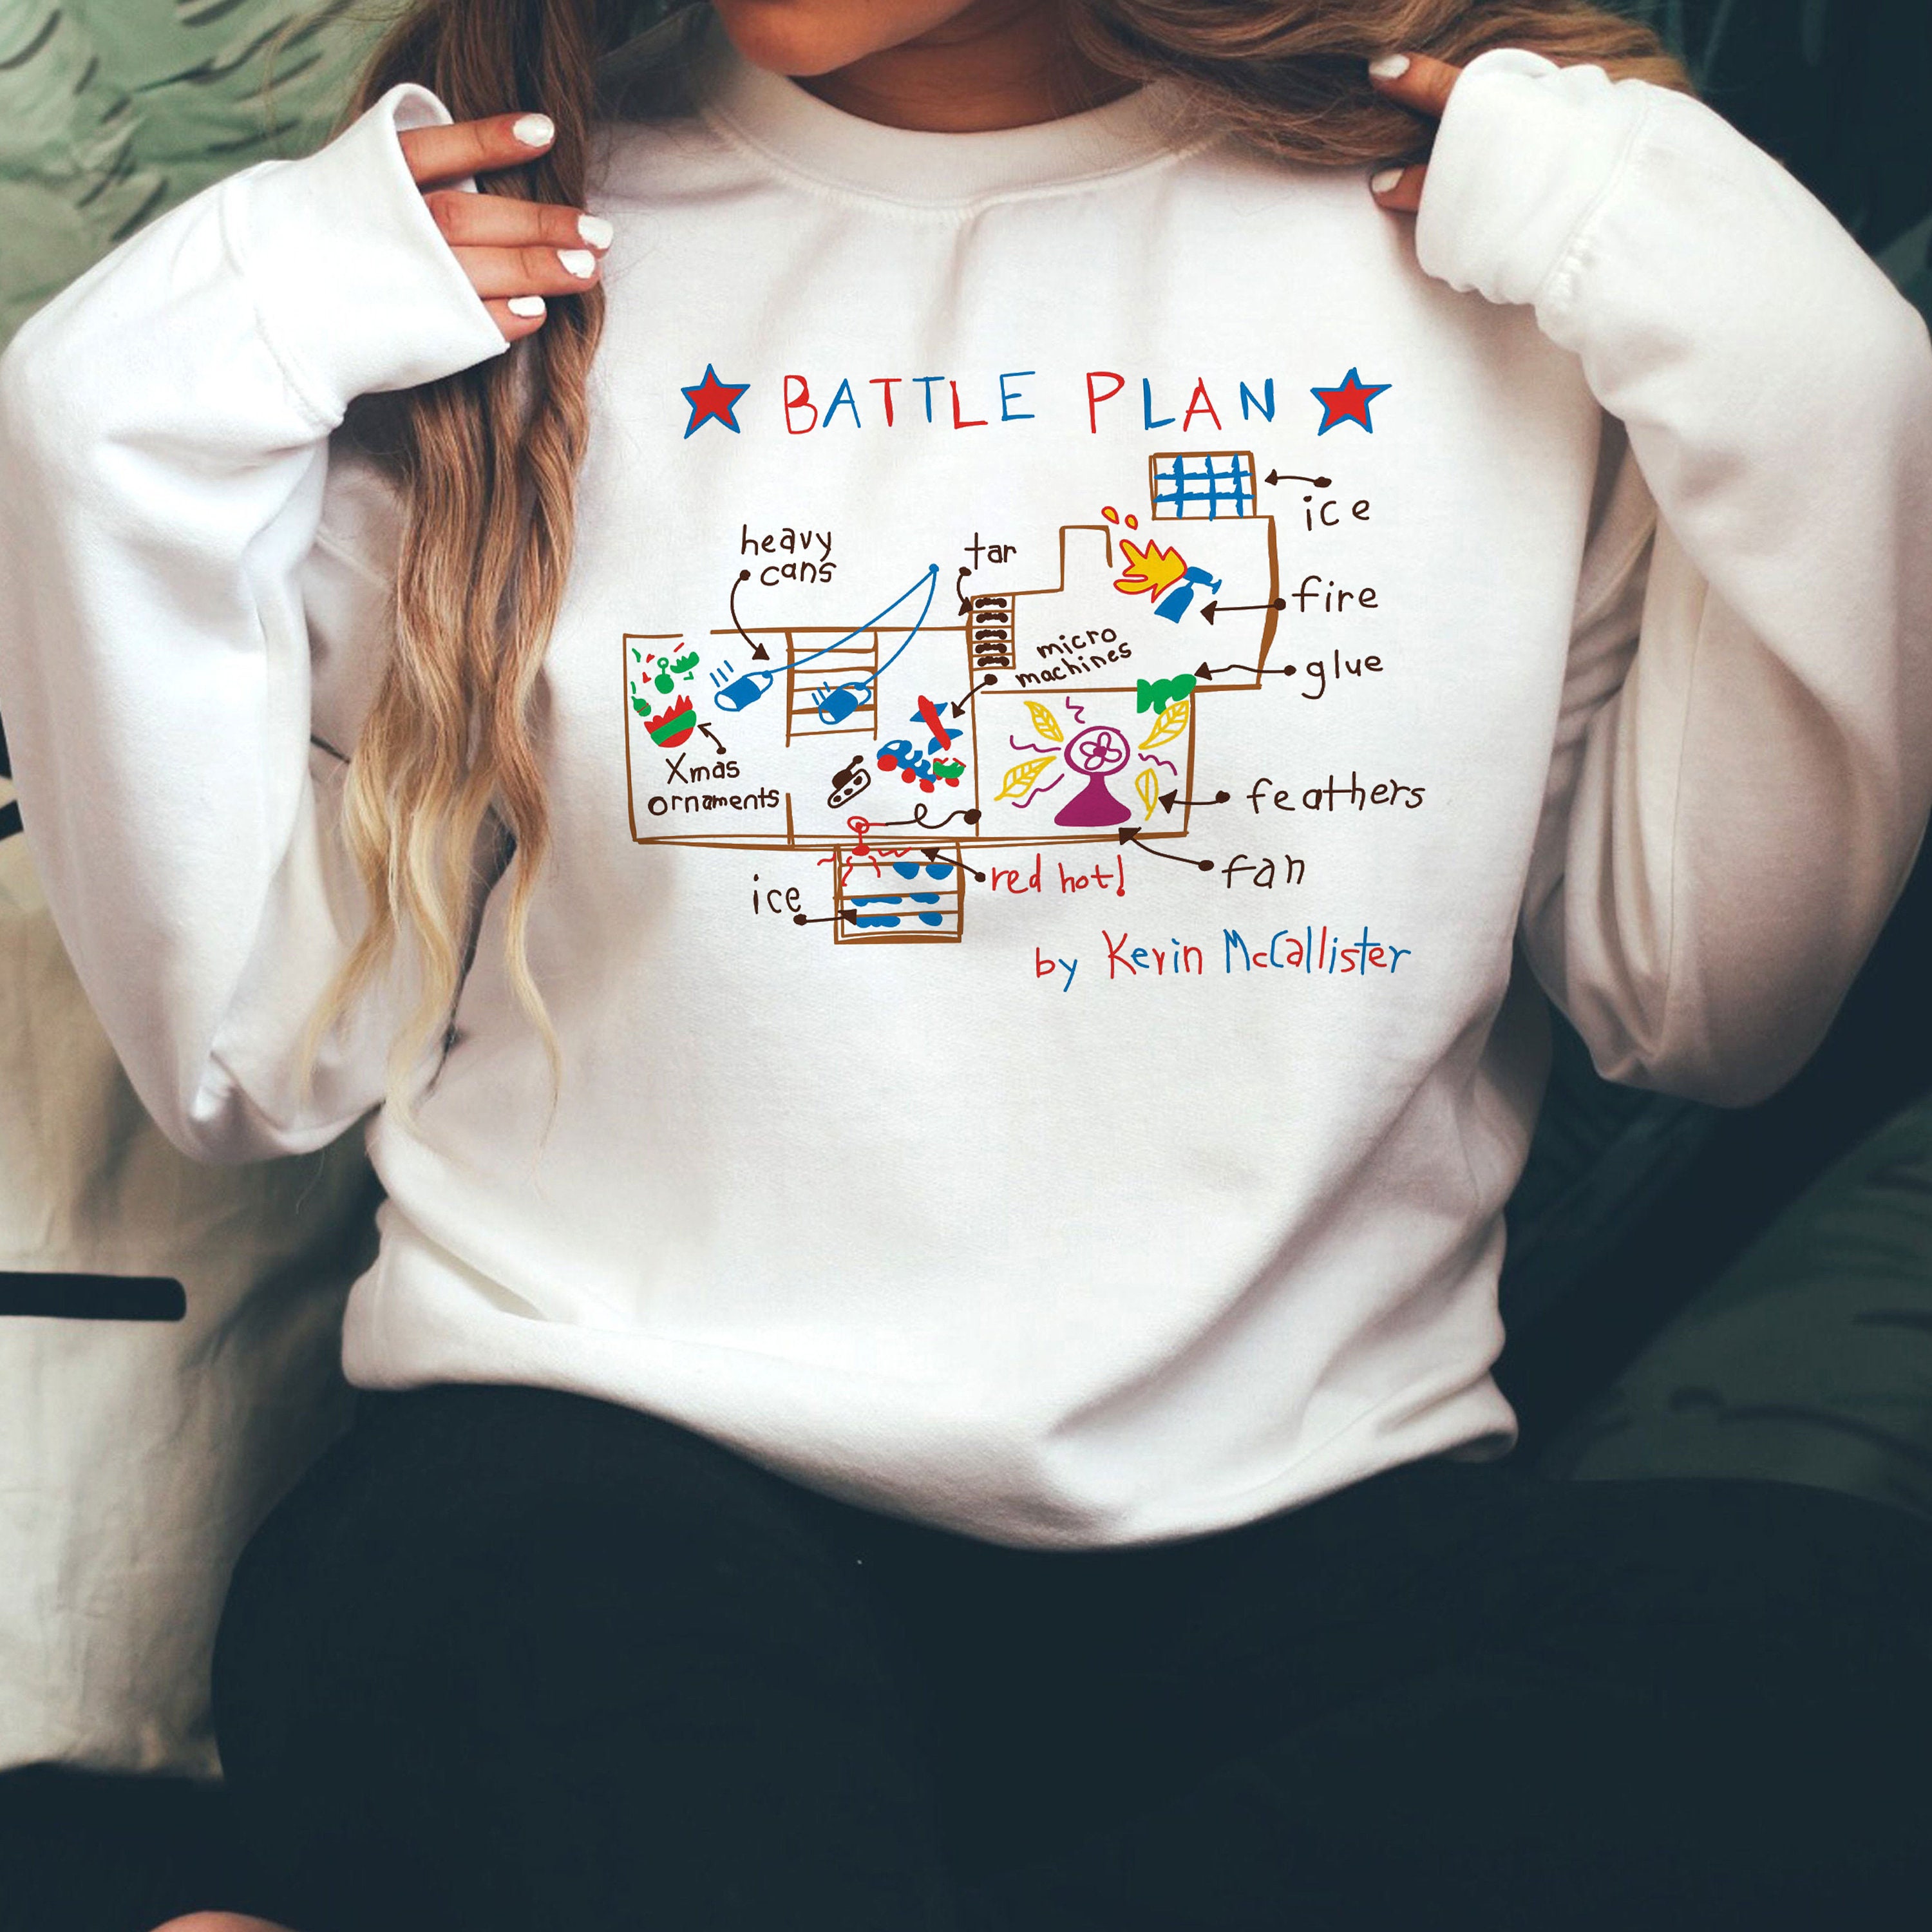 Discover Battle Plan By Kevin McCallister Sweatshirt, McCallister Home Security Shirt, Home Alone, Christmas Movies, Christmas Gift, Kids Xmas Sweatshirts